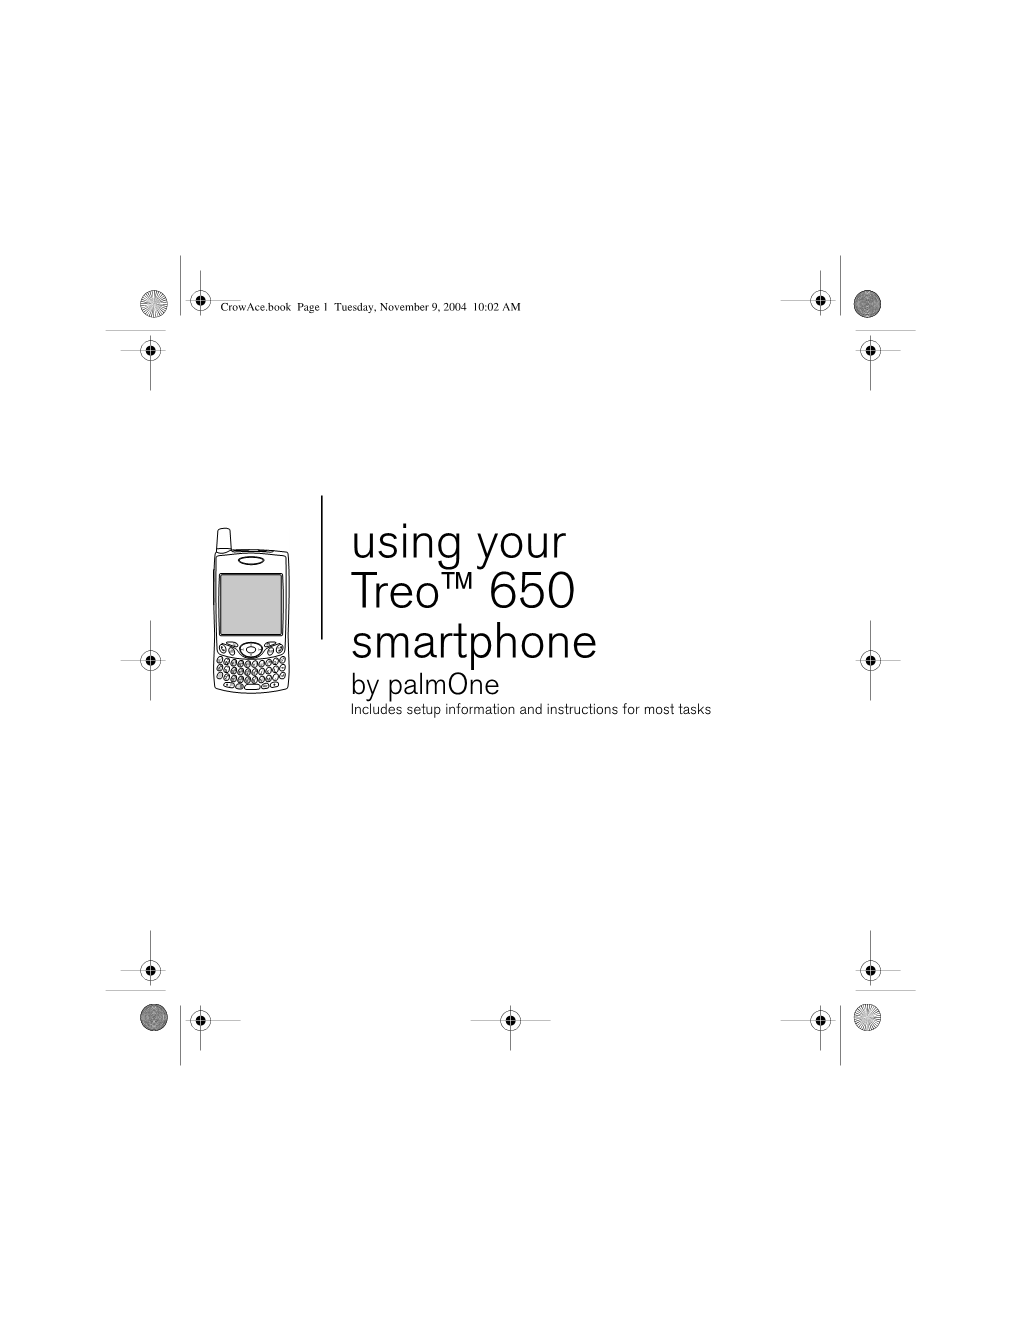 Using Your Treo™ 650 Smartphone by Palmone Includes Setup Information and Instructions for Most Tasks Crowace.Book Page 2 Tuesday, November 9, 2004 10:02 AM